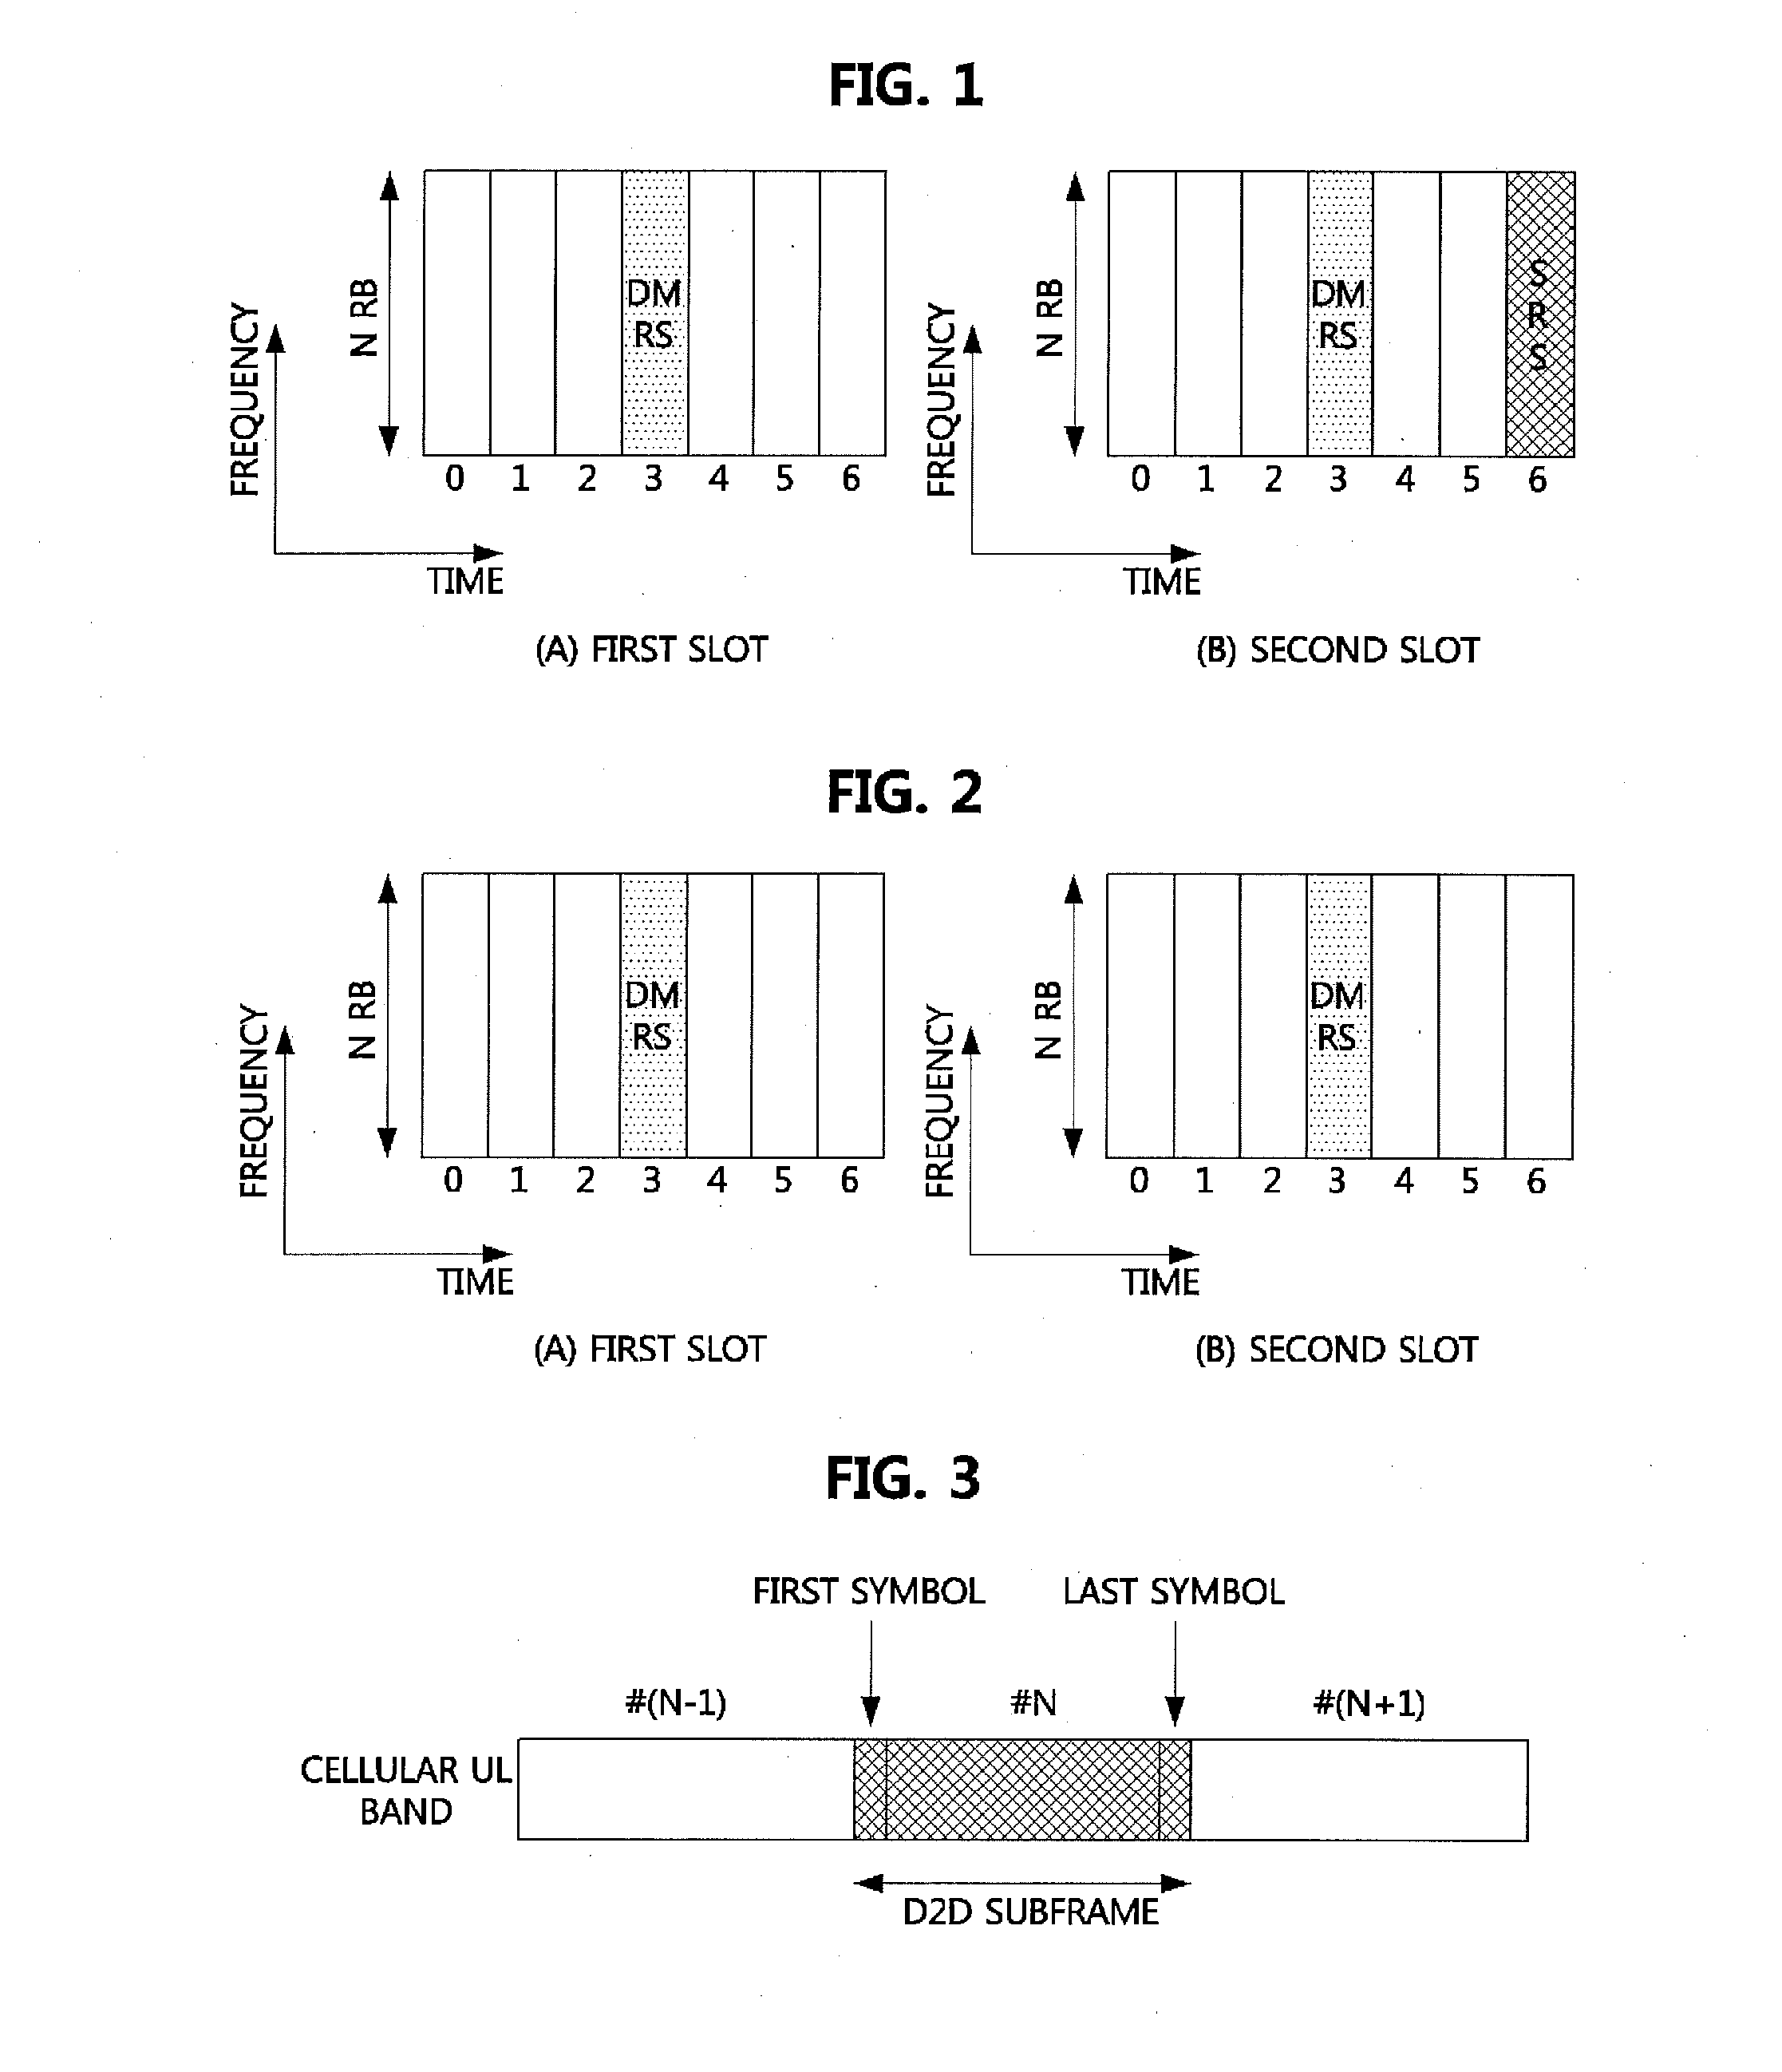 Method of transceiving for device to device communication